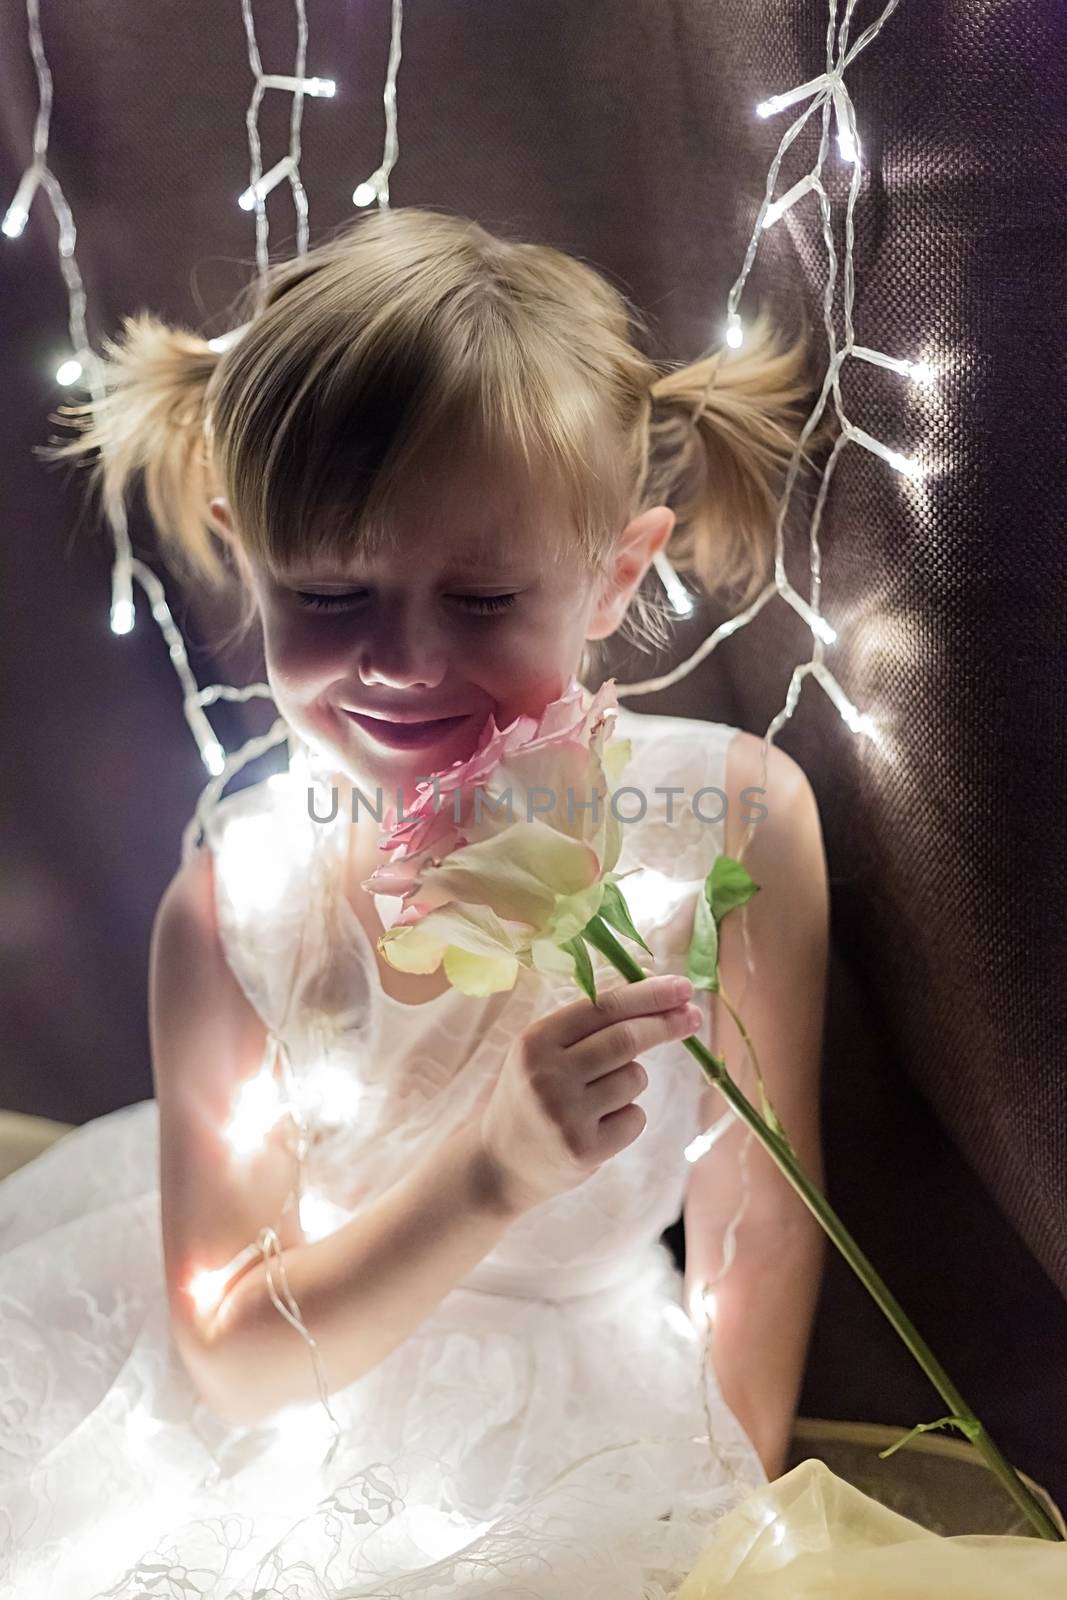 Young adorable pretty girl with rose from her father over dark background by galinasharapova